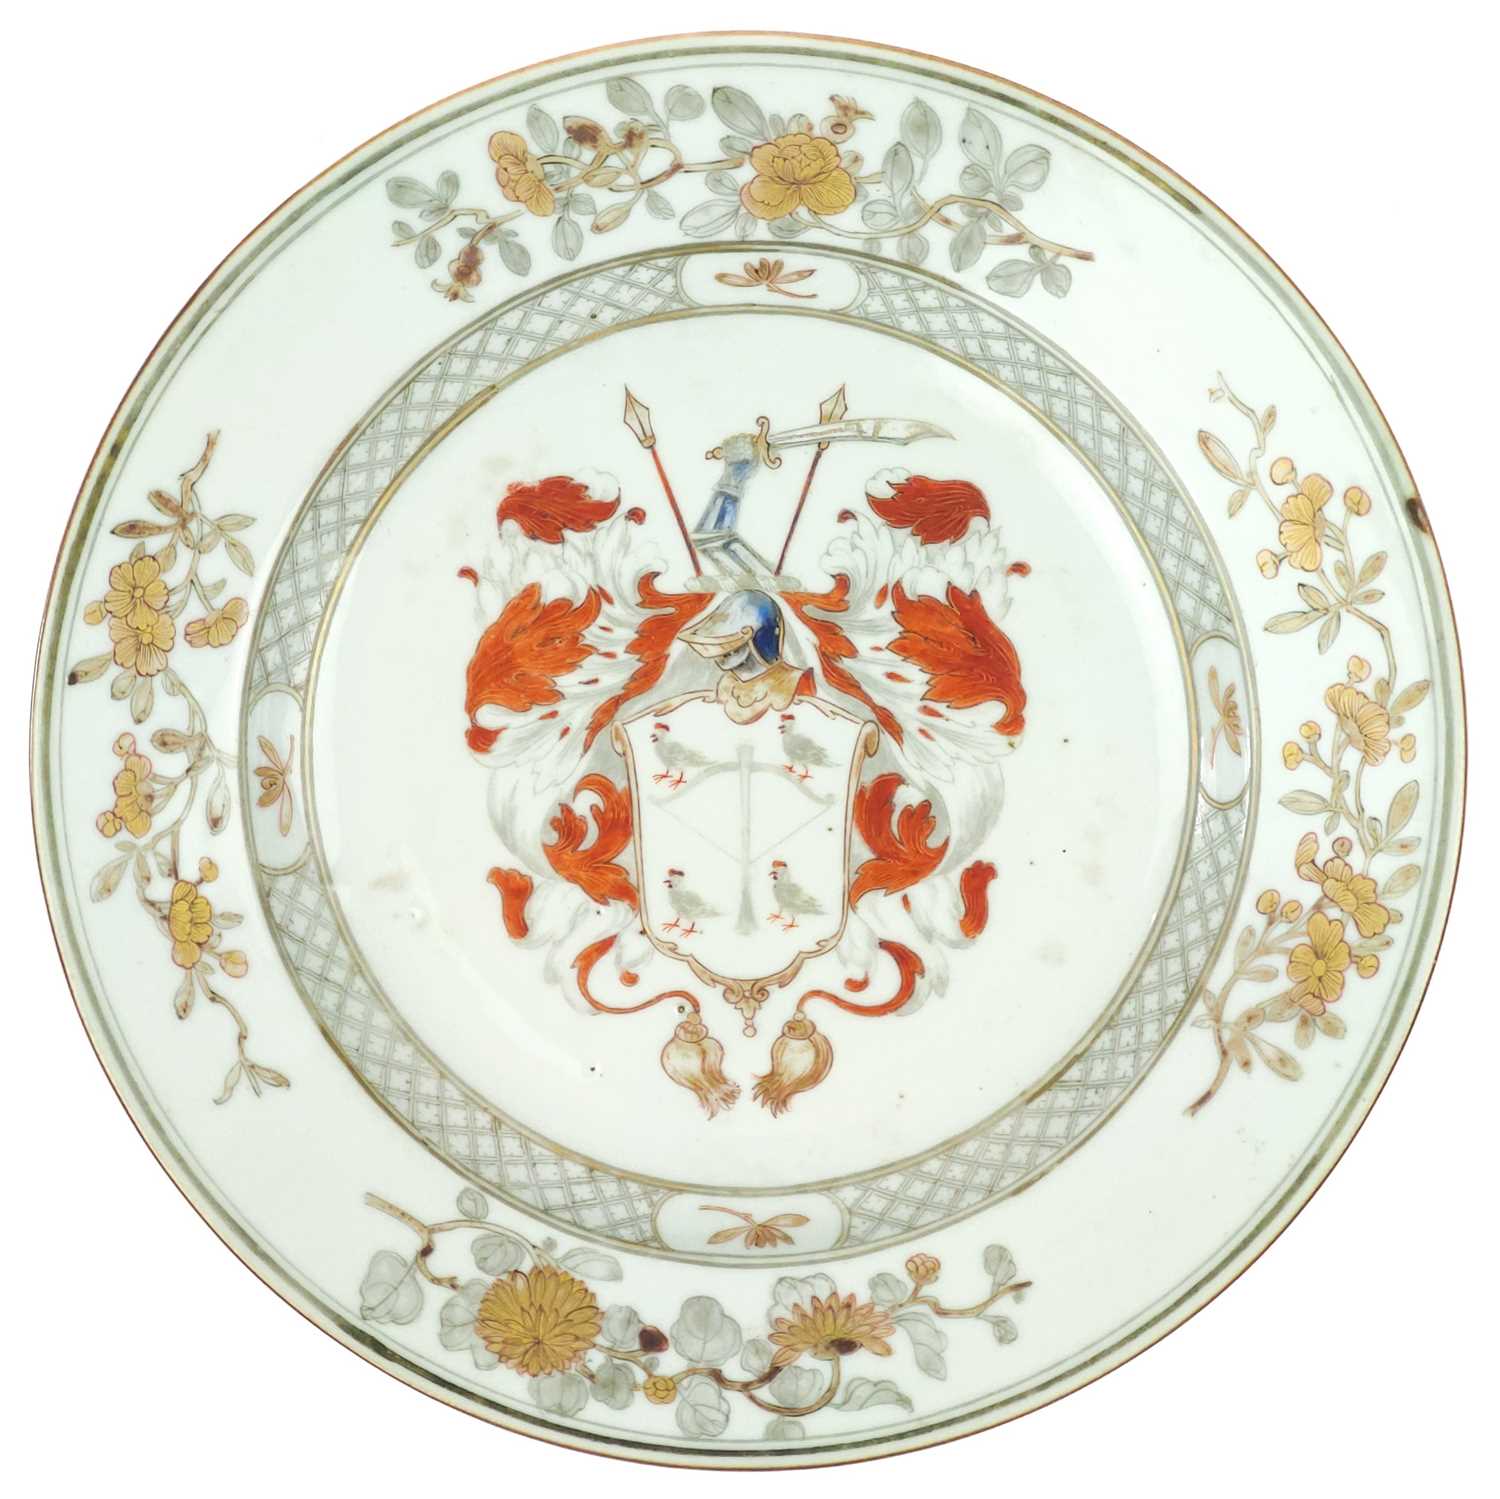 A Chinese armorial porcelain plate, 18th century.